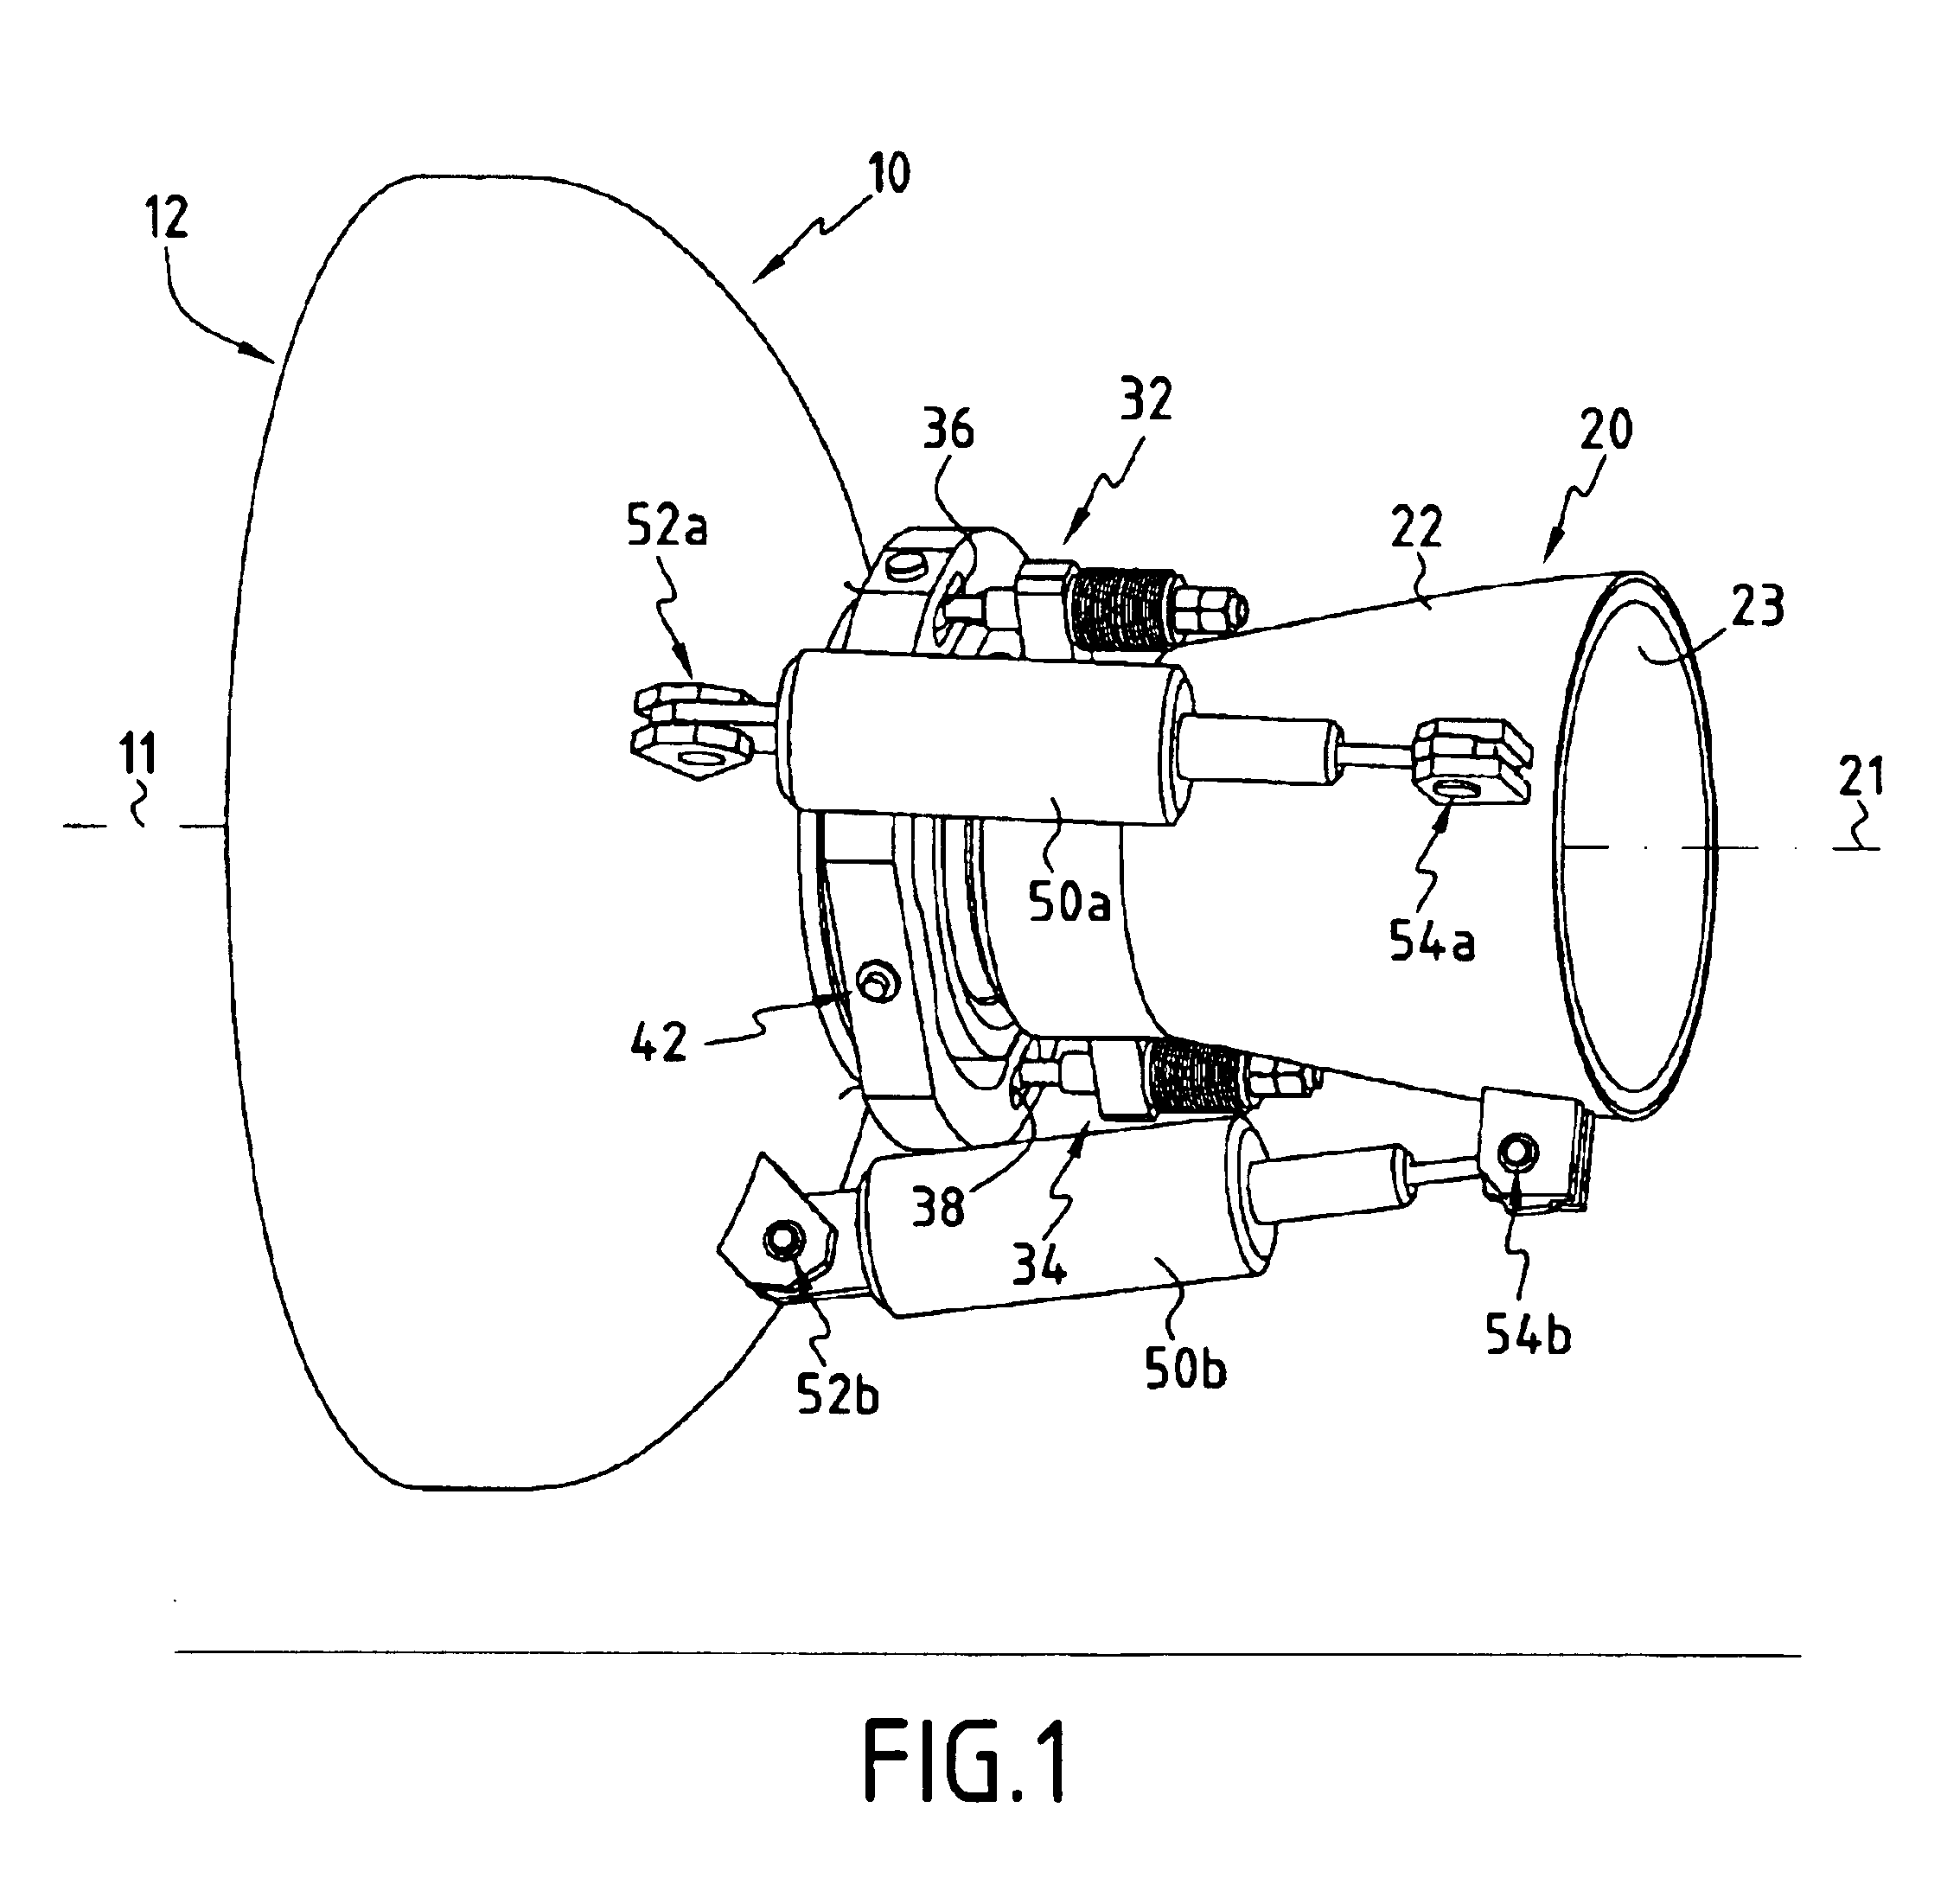 Rocket engine nozzle that is steerable by means of a moving diverging portion on a cardan mount